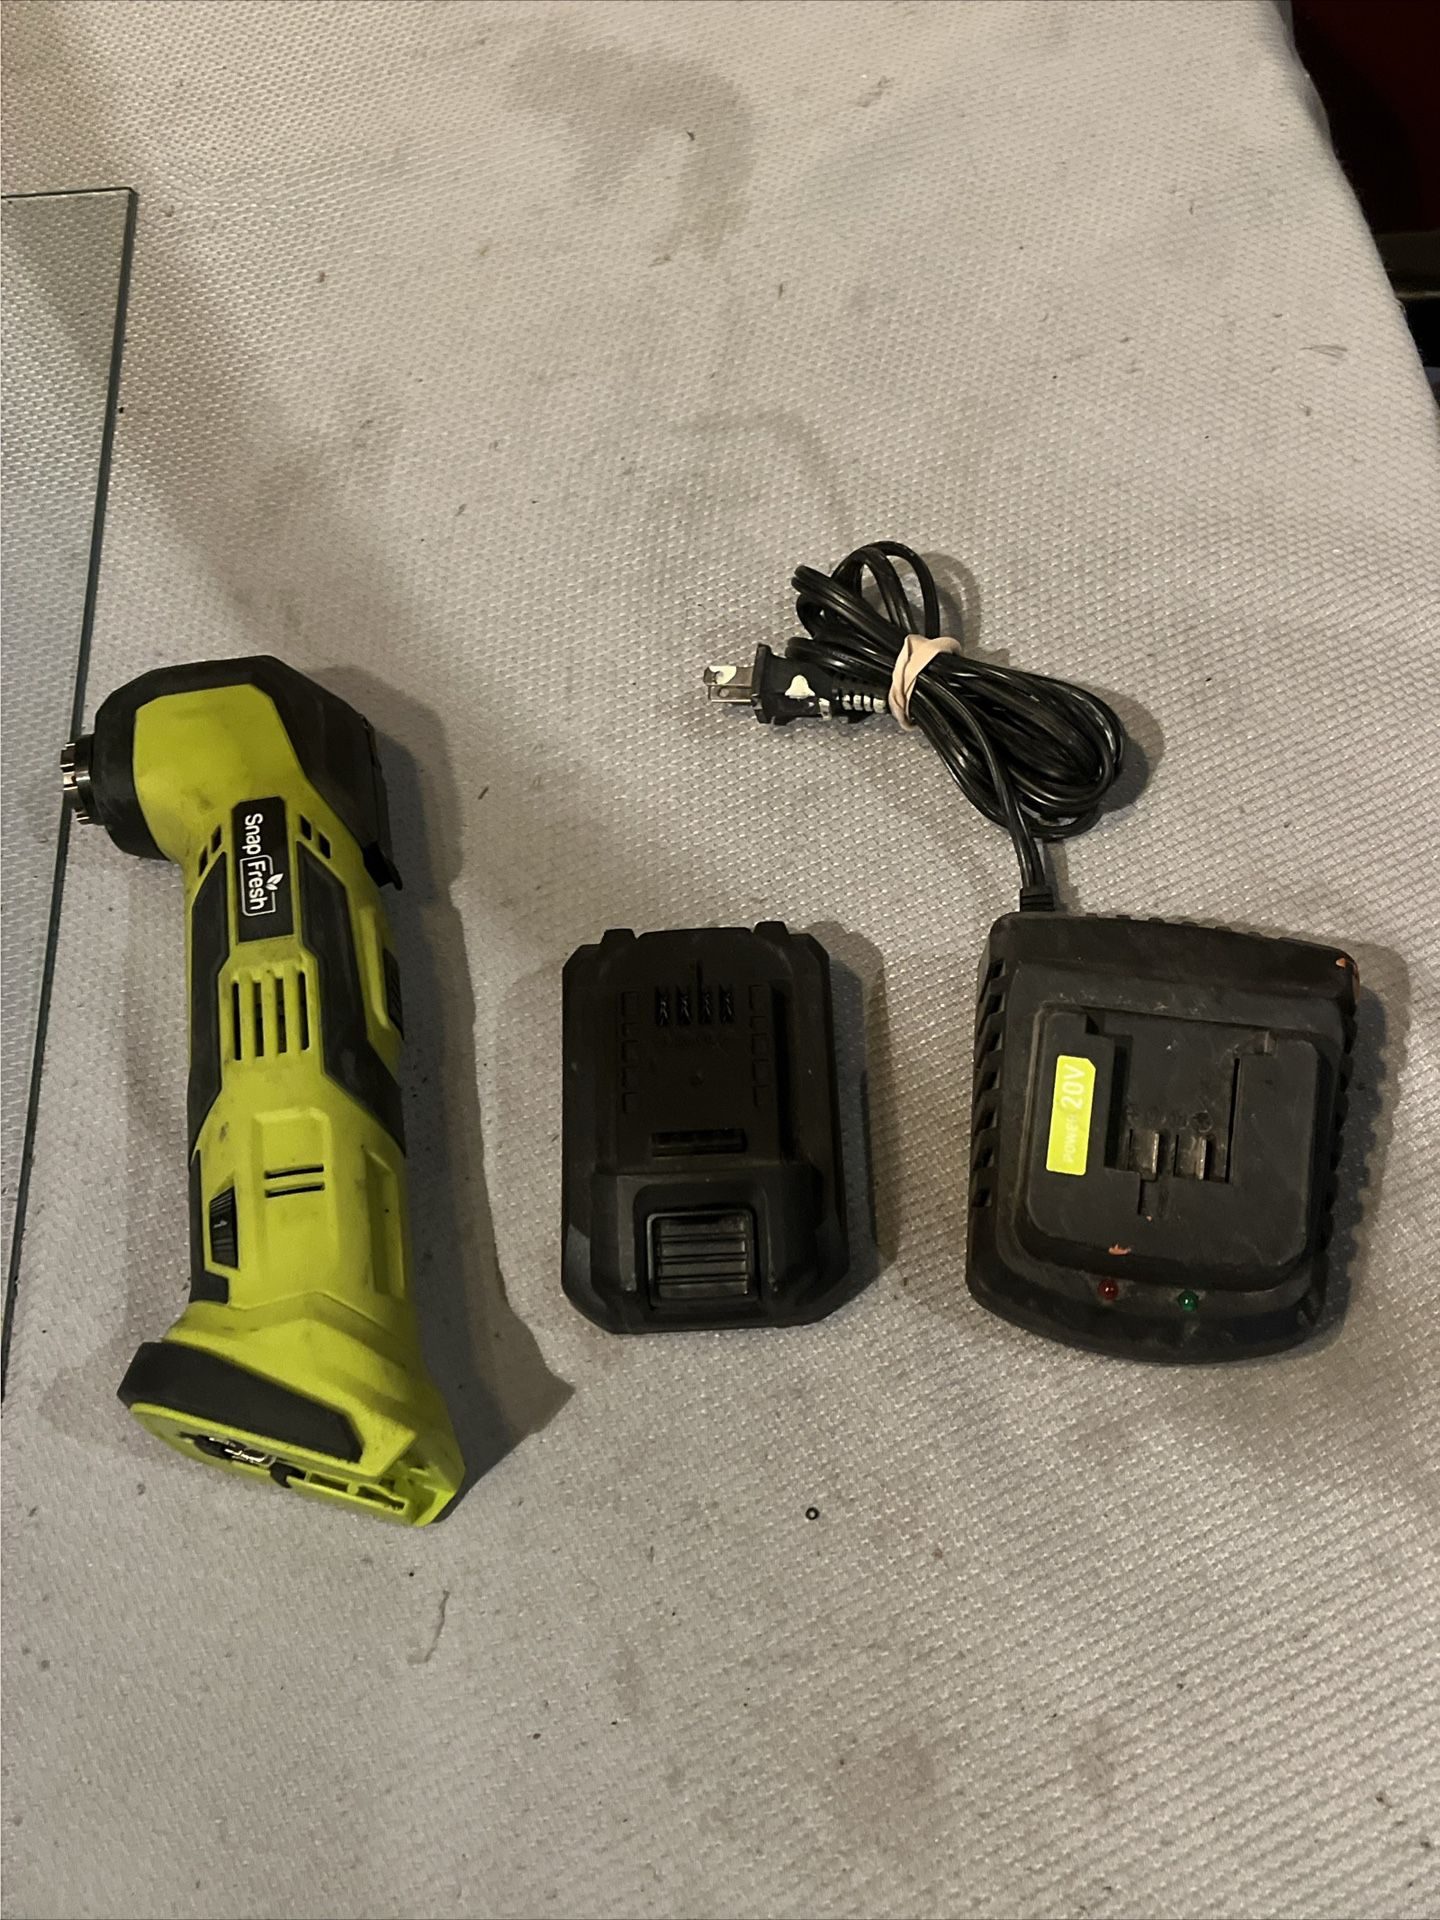 Snap Fresh BBT-ZOY01 Cordless Multi-Tool 20v w/ Battery & Charger Tested